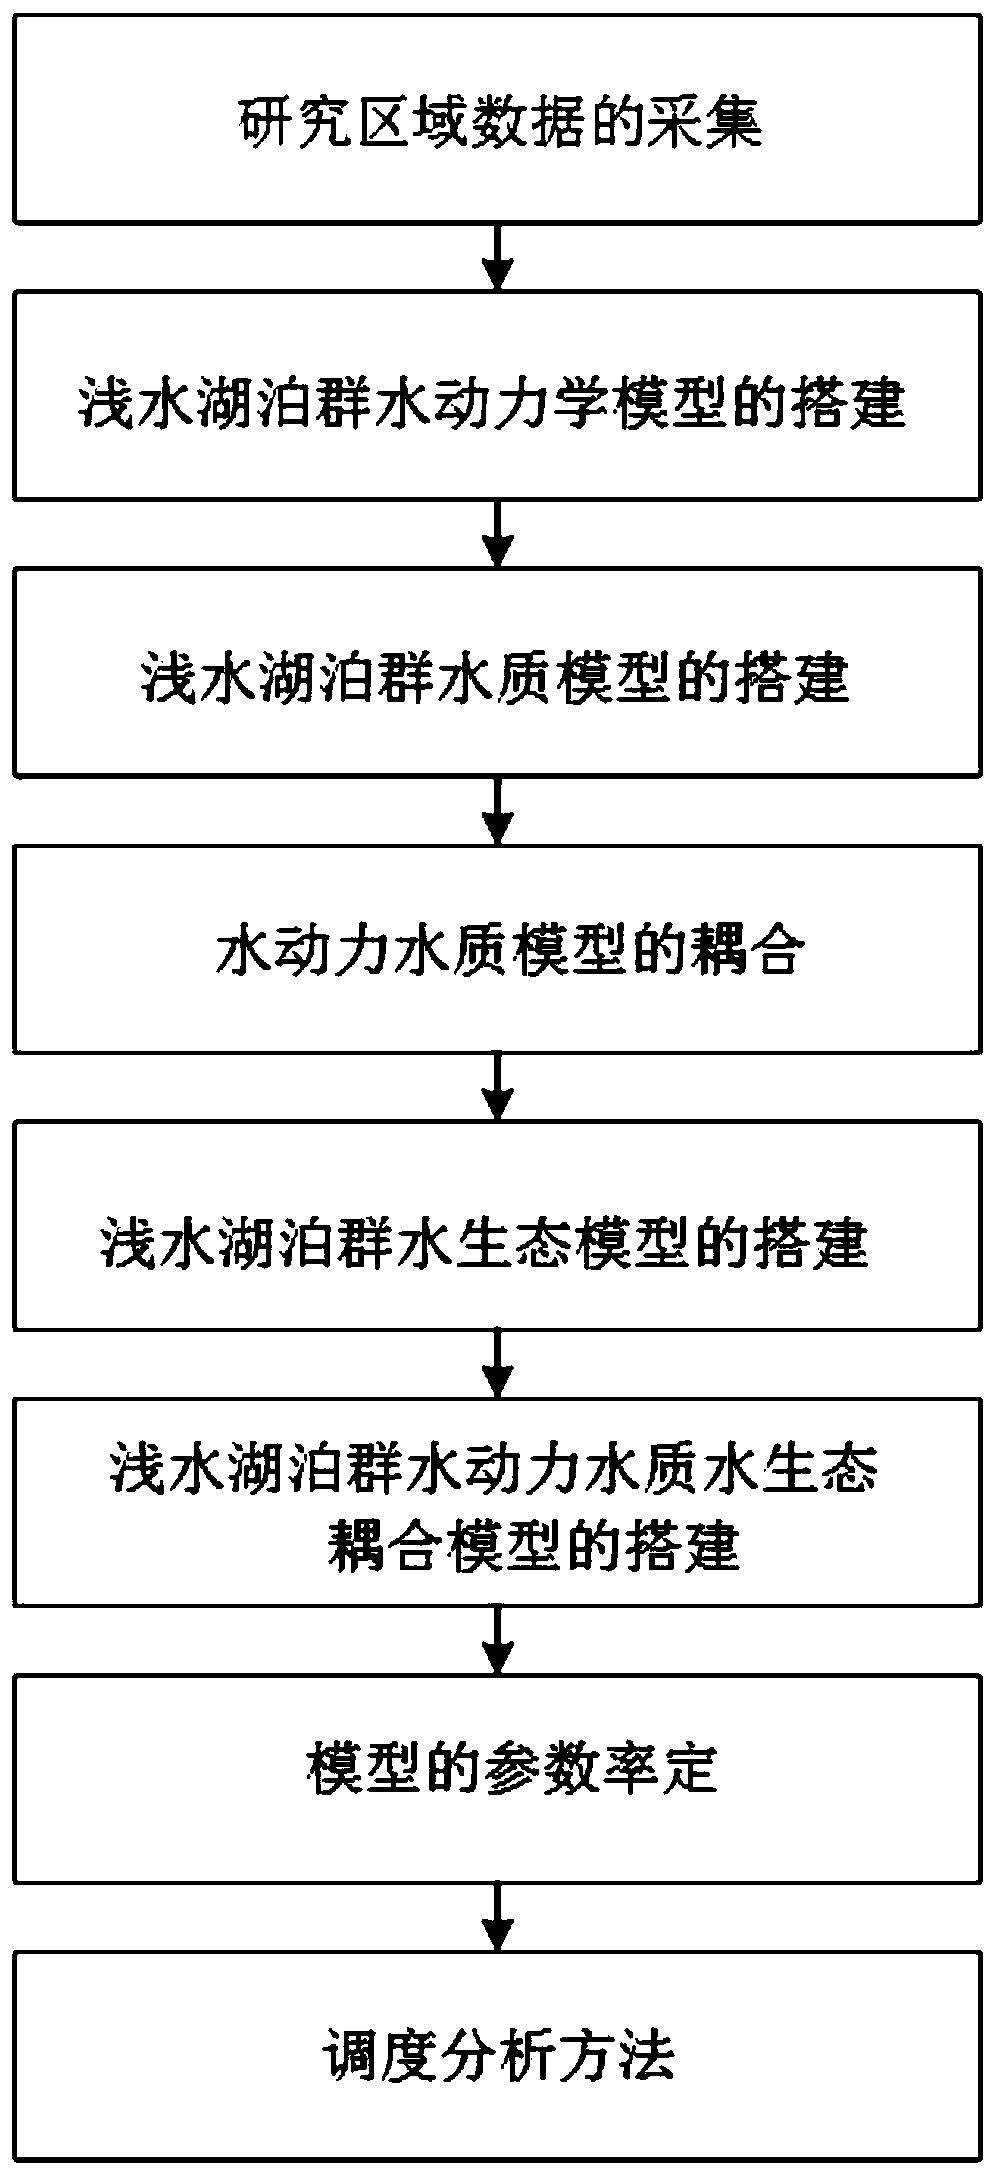 A shallow lake group water quality, water quantity and water ecological coupling scheduling analysis method